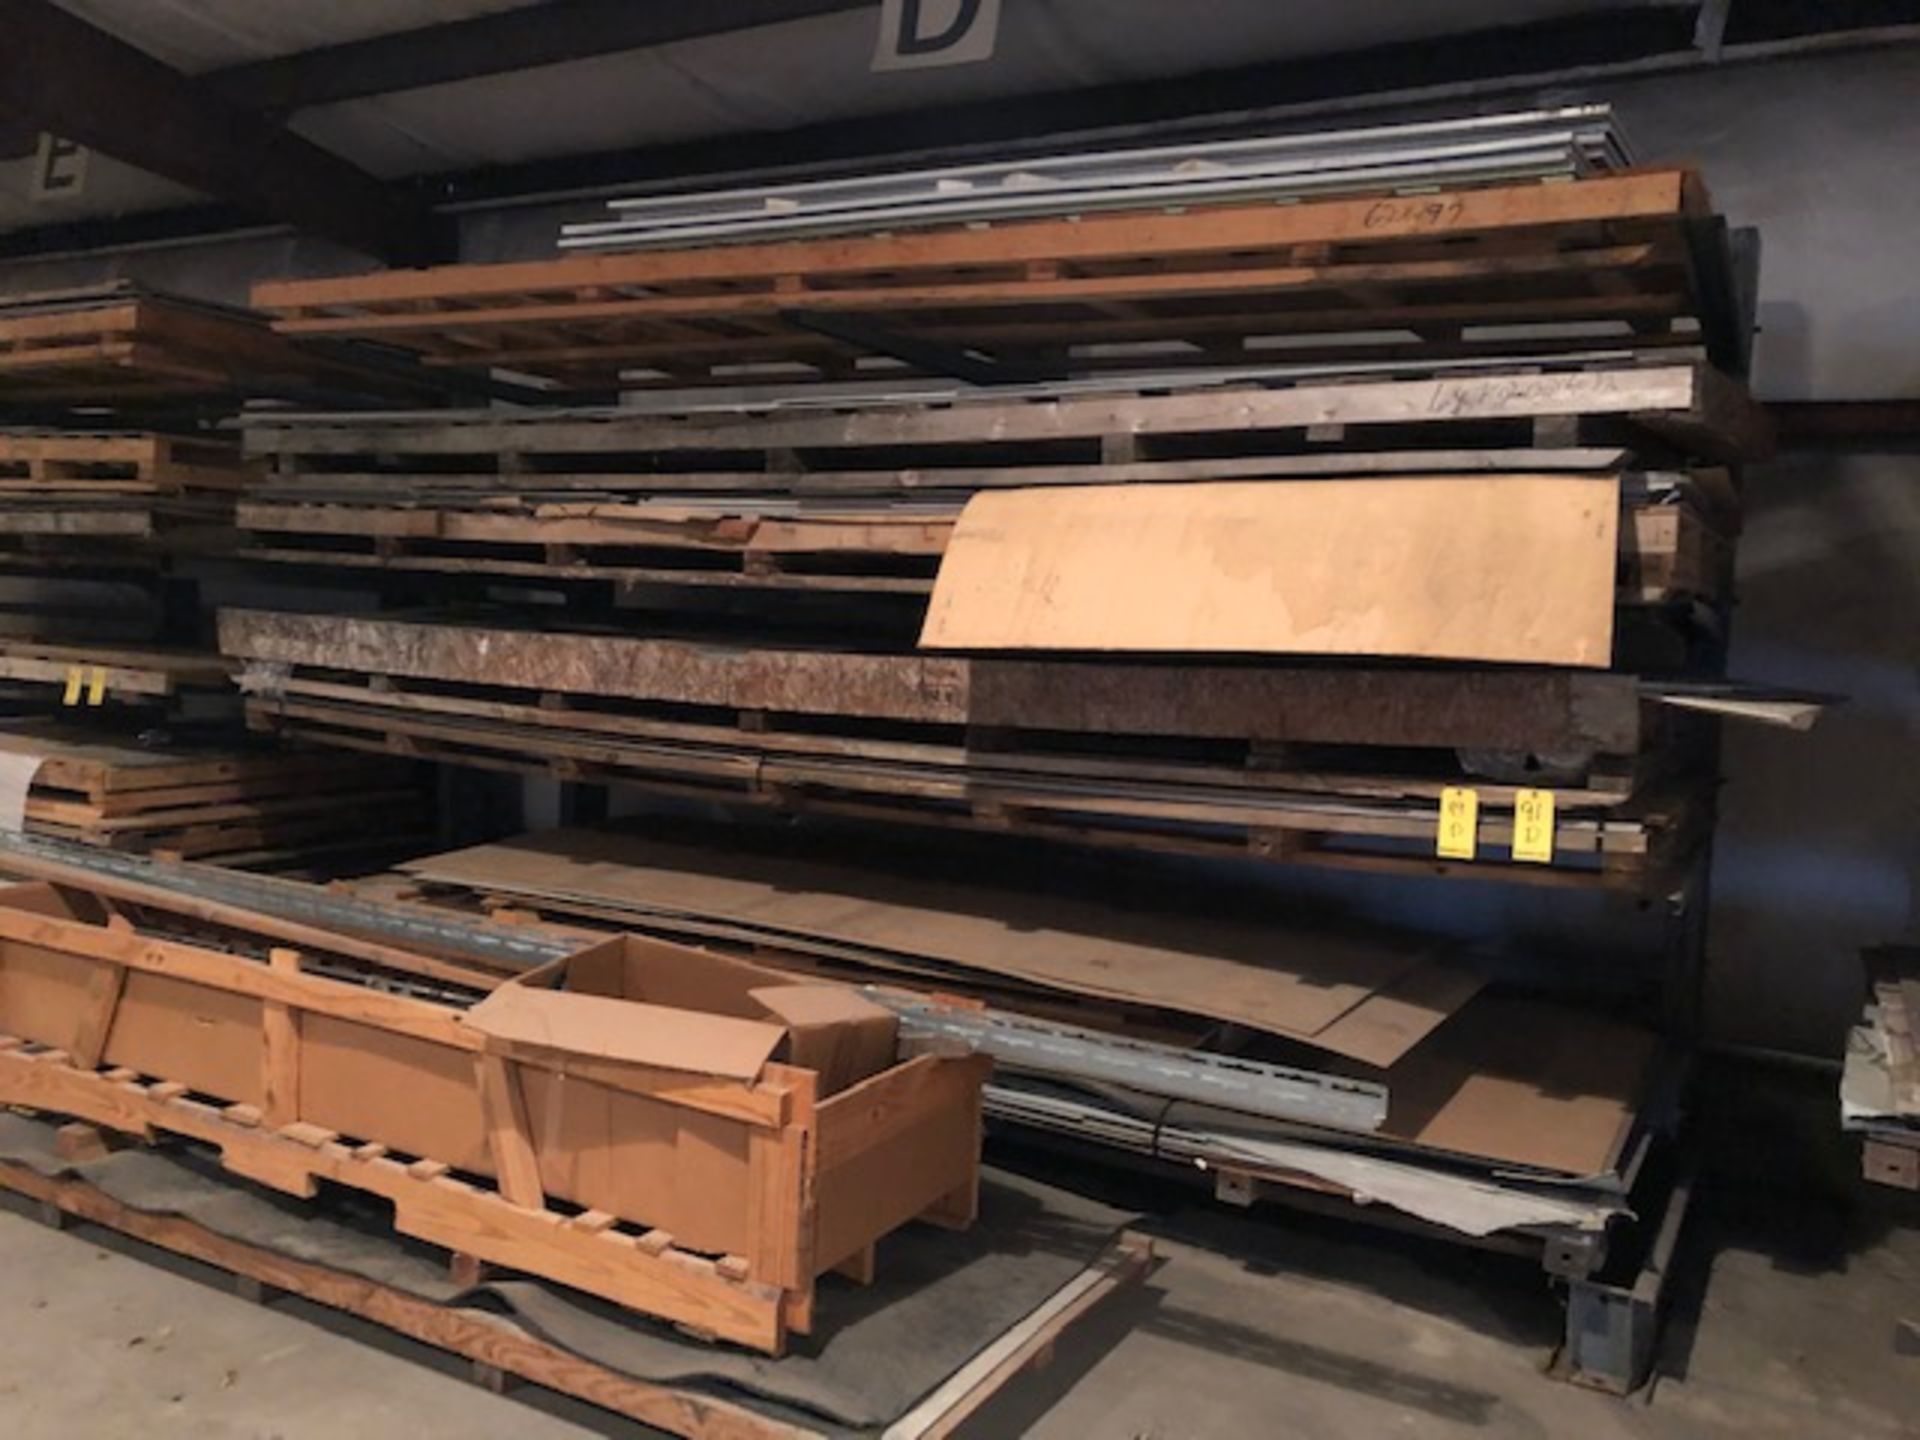 LOT CONTENTS ONLY OF CANTILEVER RACK 91D TO INCLUDE - MISC. ALUM. COMPOSITE PANELS, ETC.